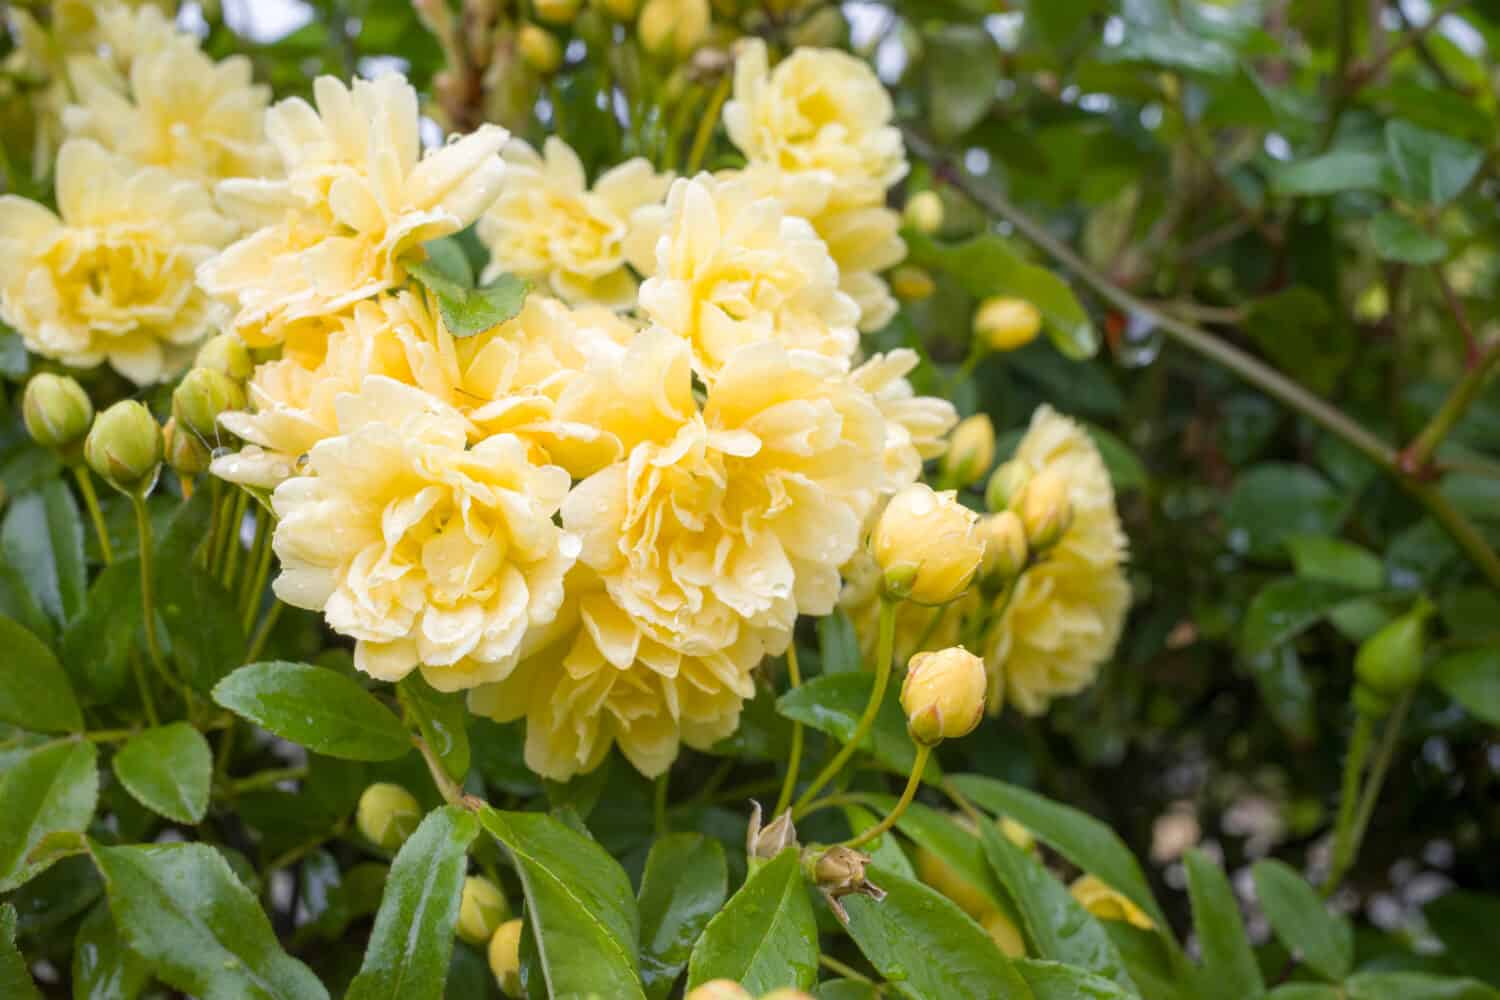 Lady Banks' rose (Rosa banksiae) with beautiful fresh yellow